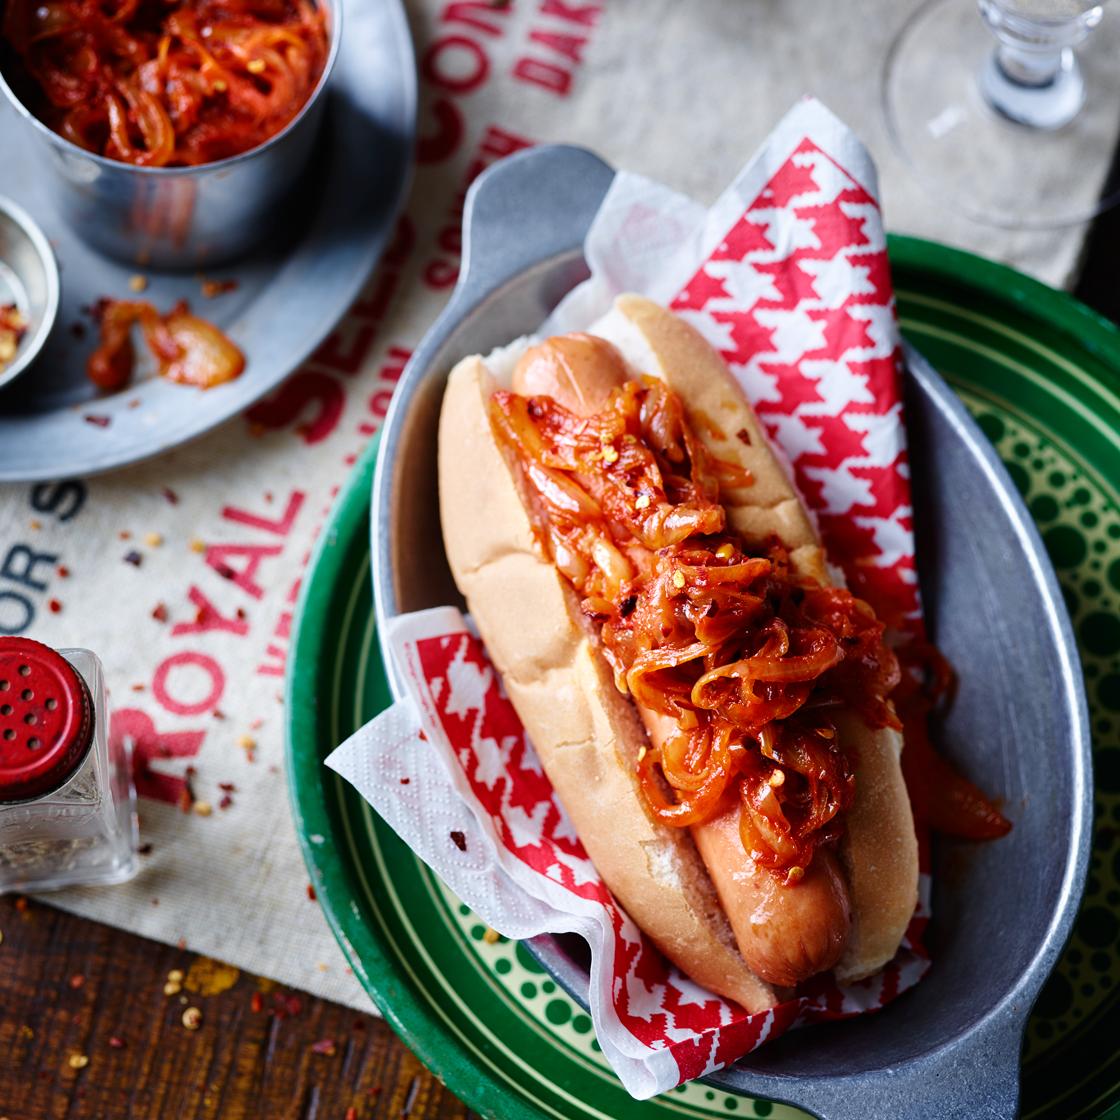 Gourmet Hot Dog Recipes for Mediterranean Inspired Hot Dogs